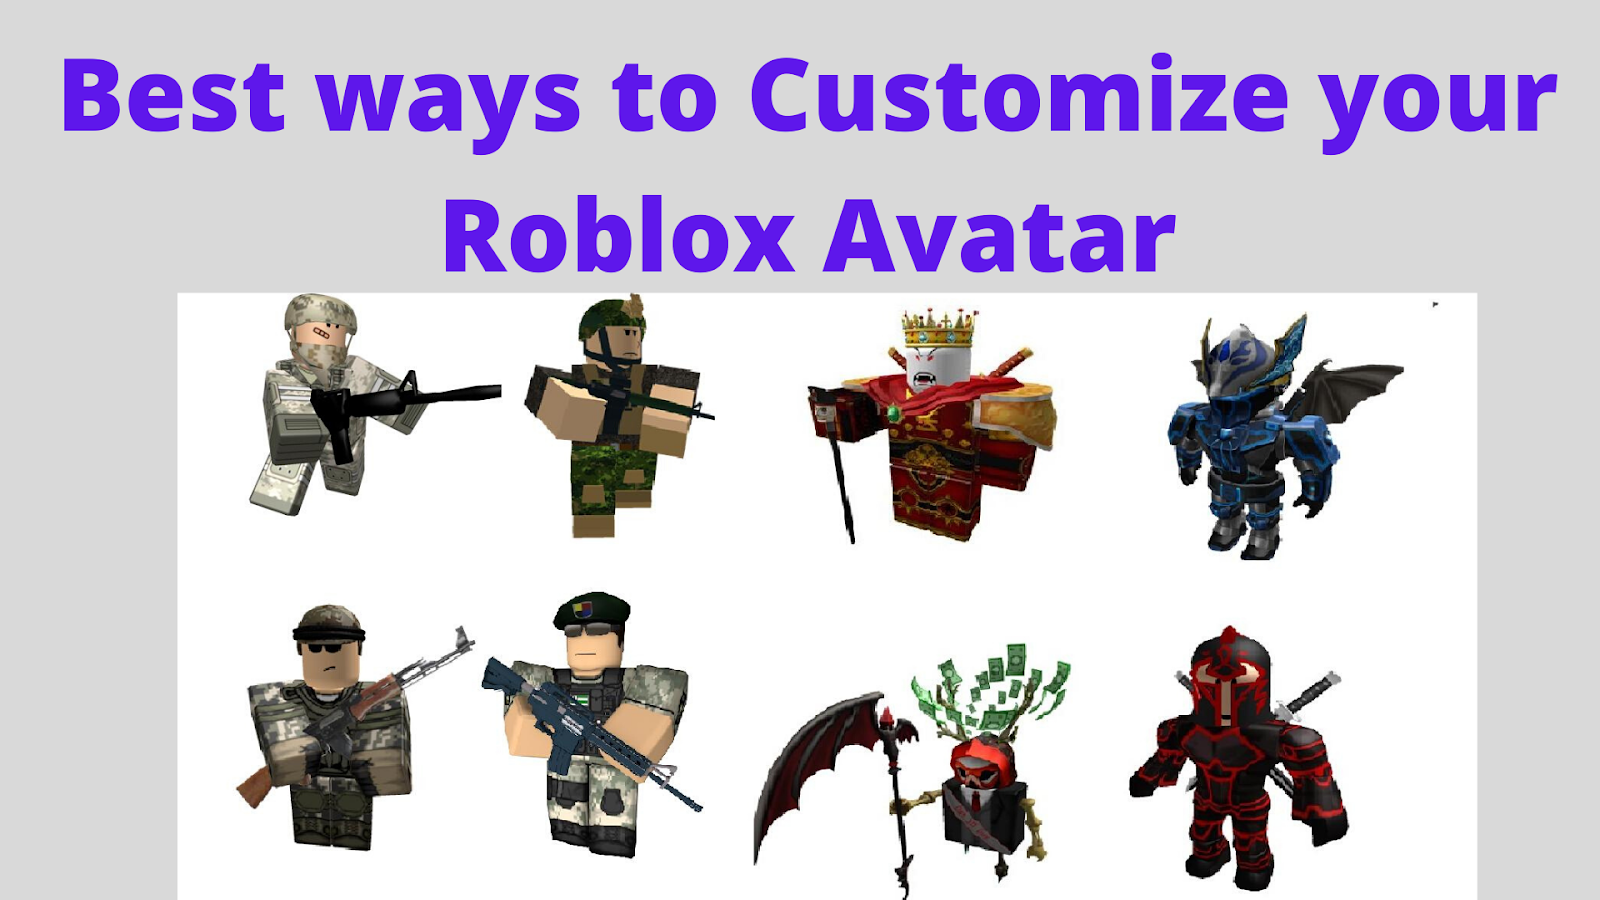 Best Ways To Customize Your Roblox Avatar Medium - how to look good on roblox with robux astar tutorial